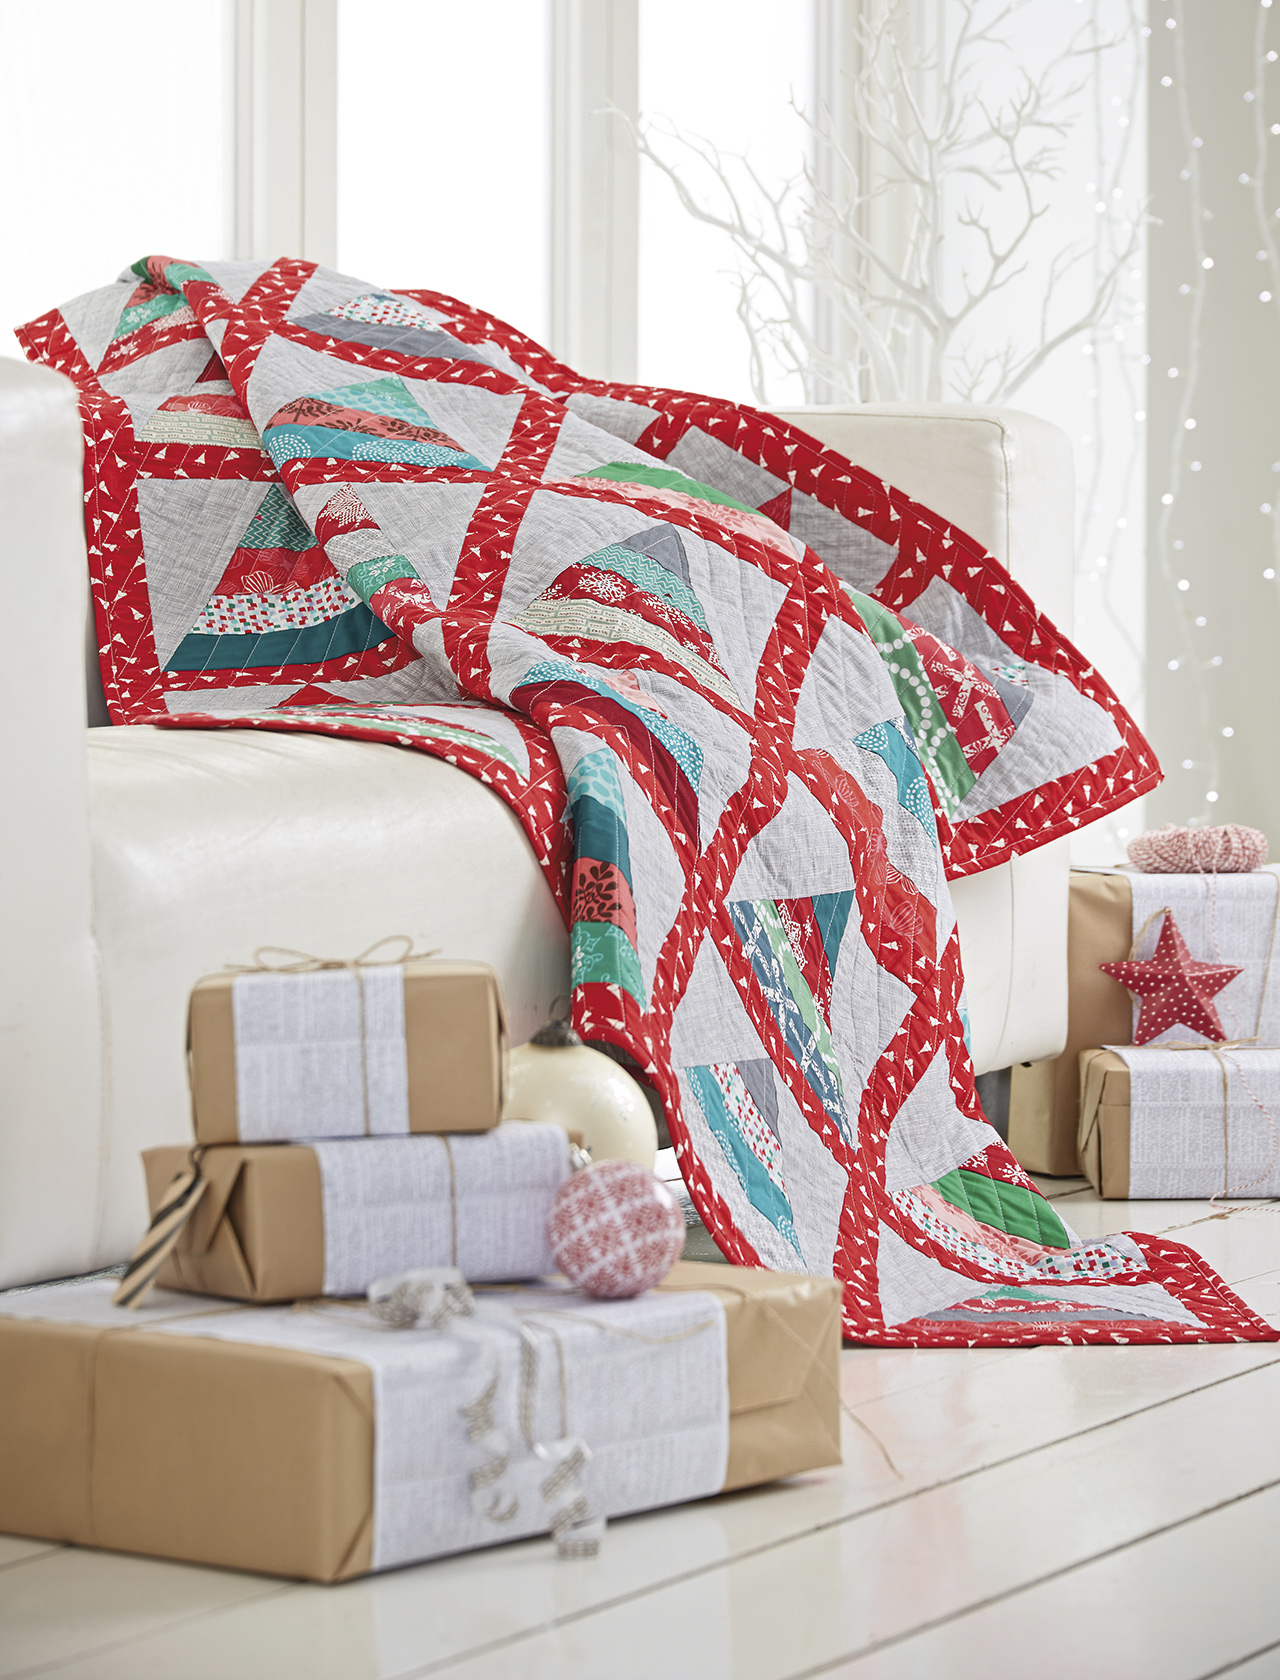 Free Christmas quilt pattern